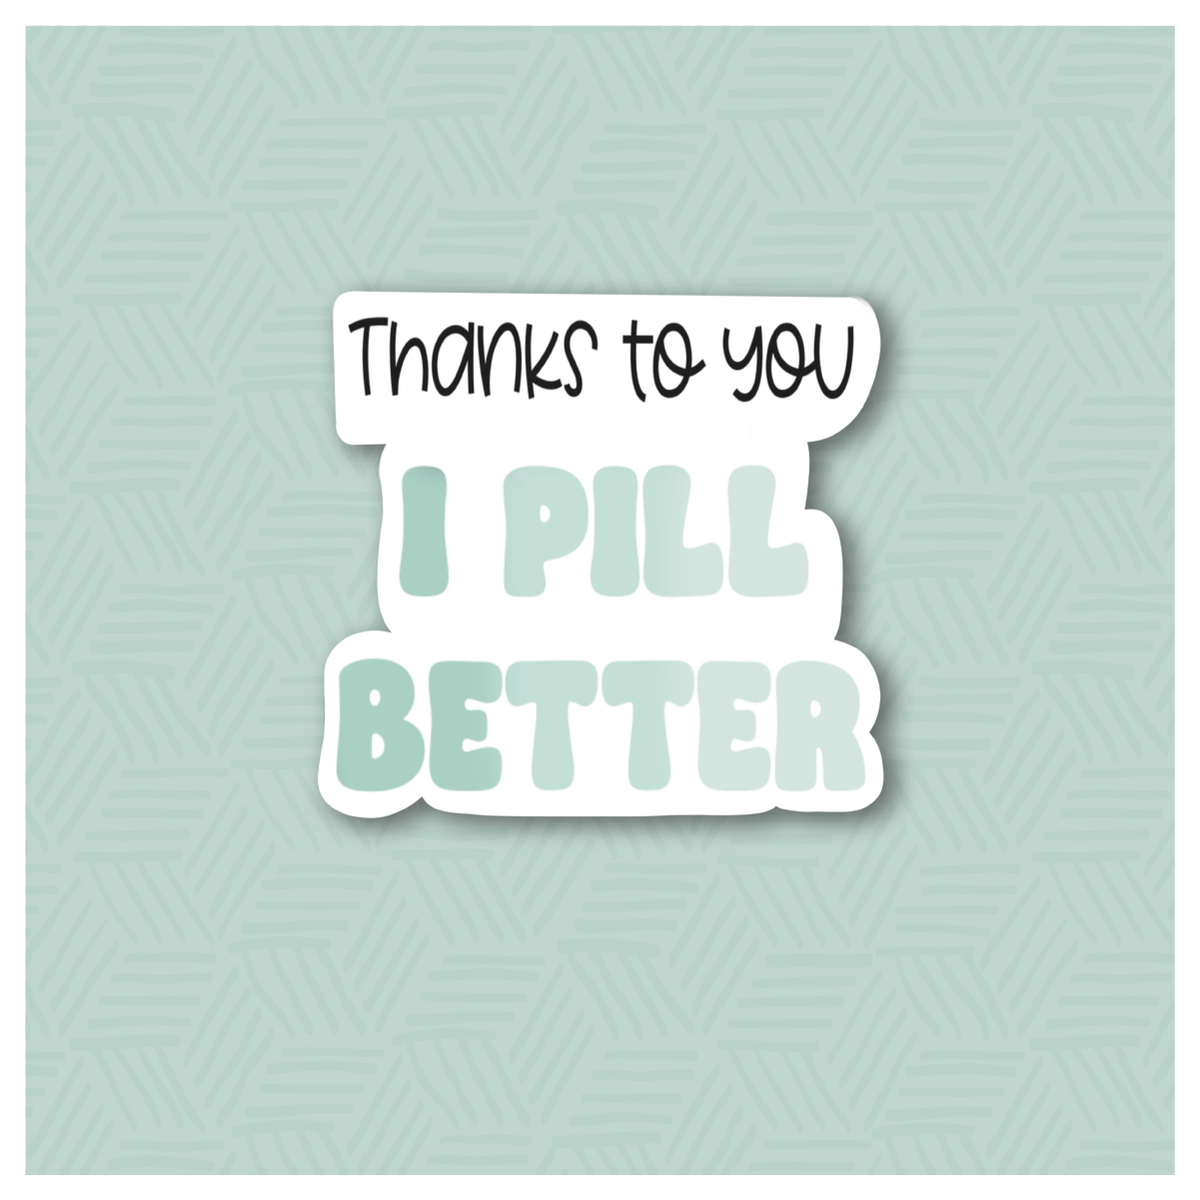 Thanks to You I Pill Better Hand Lettered Cookie Cutter